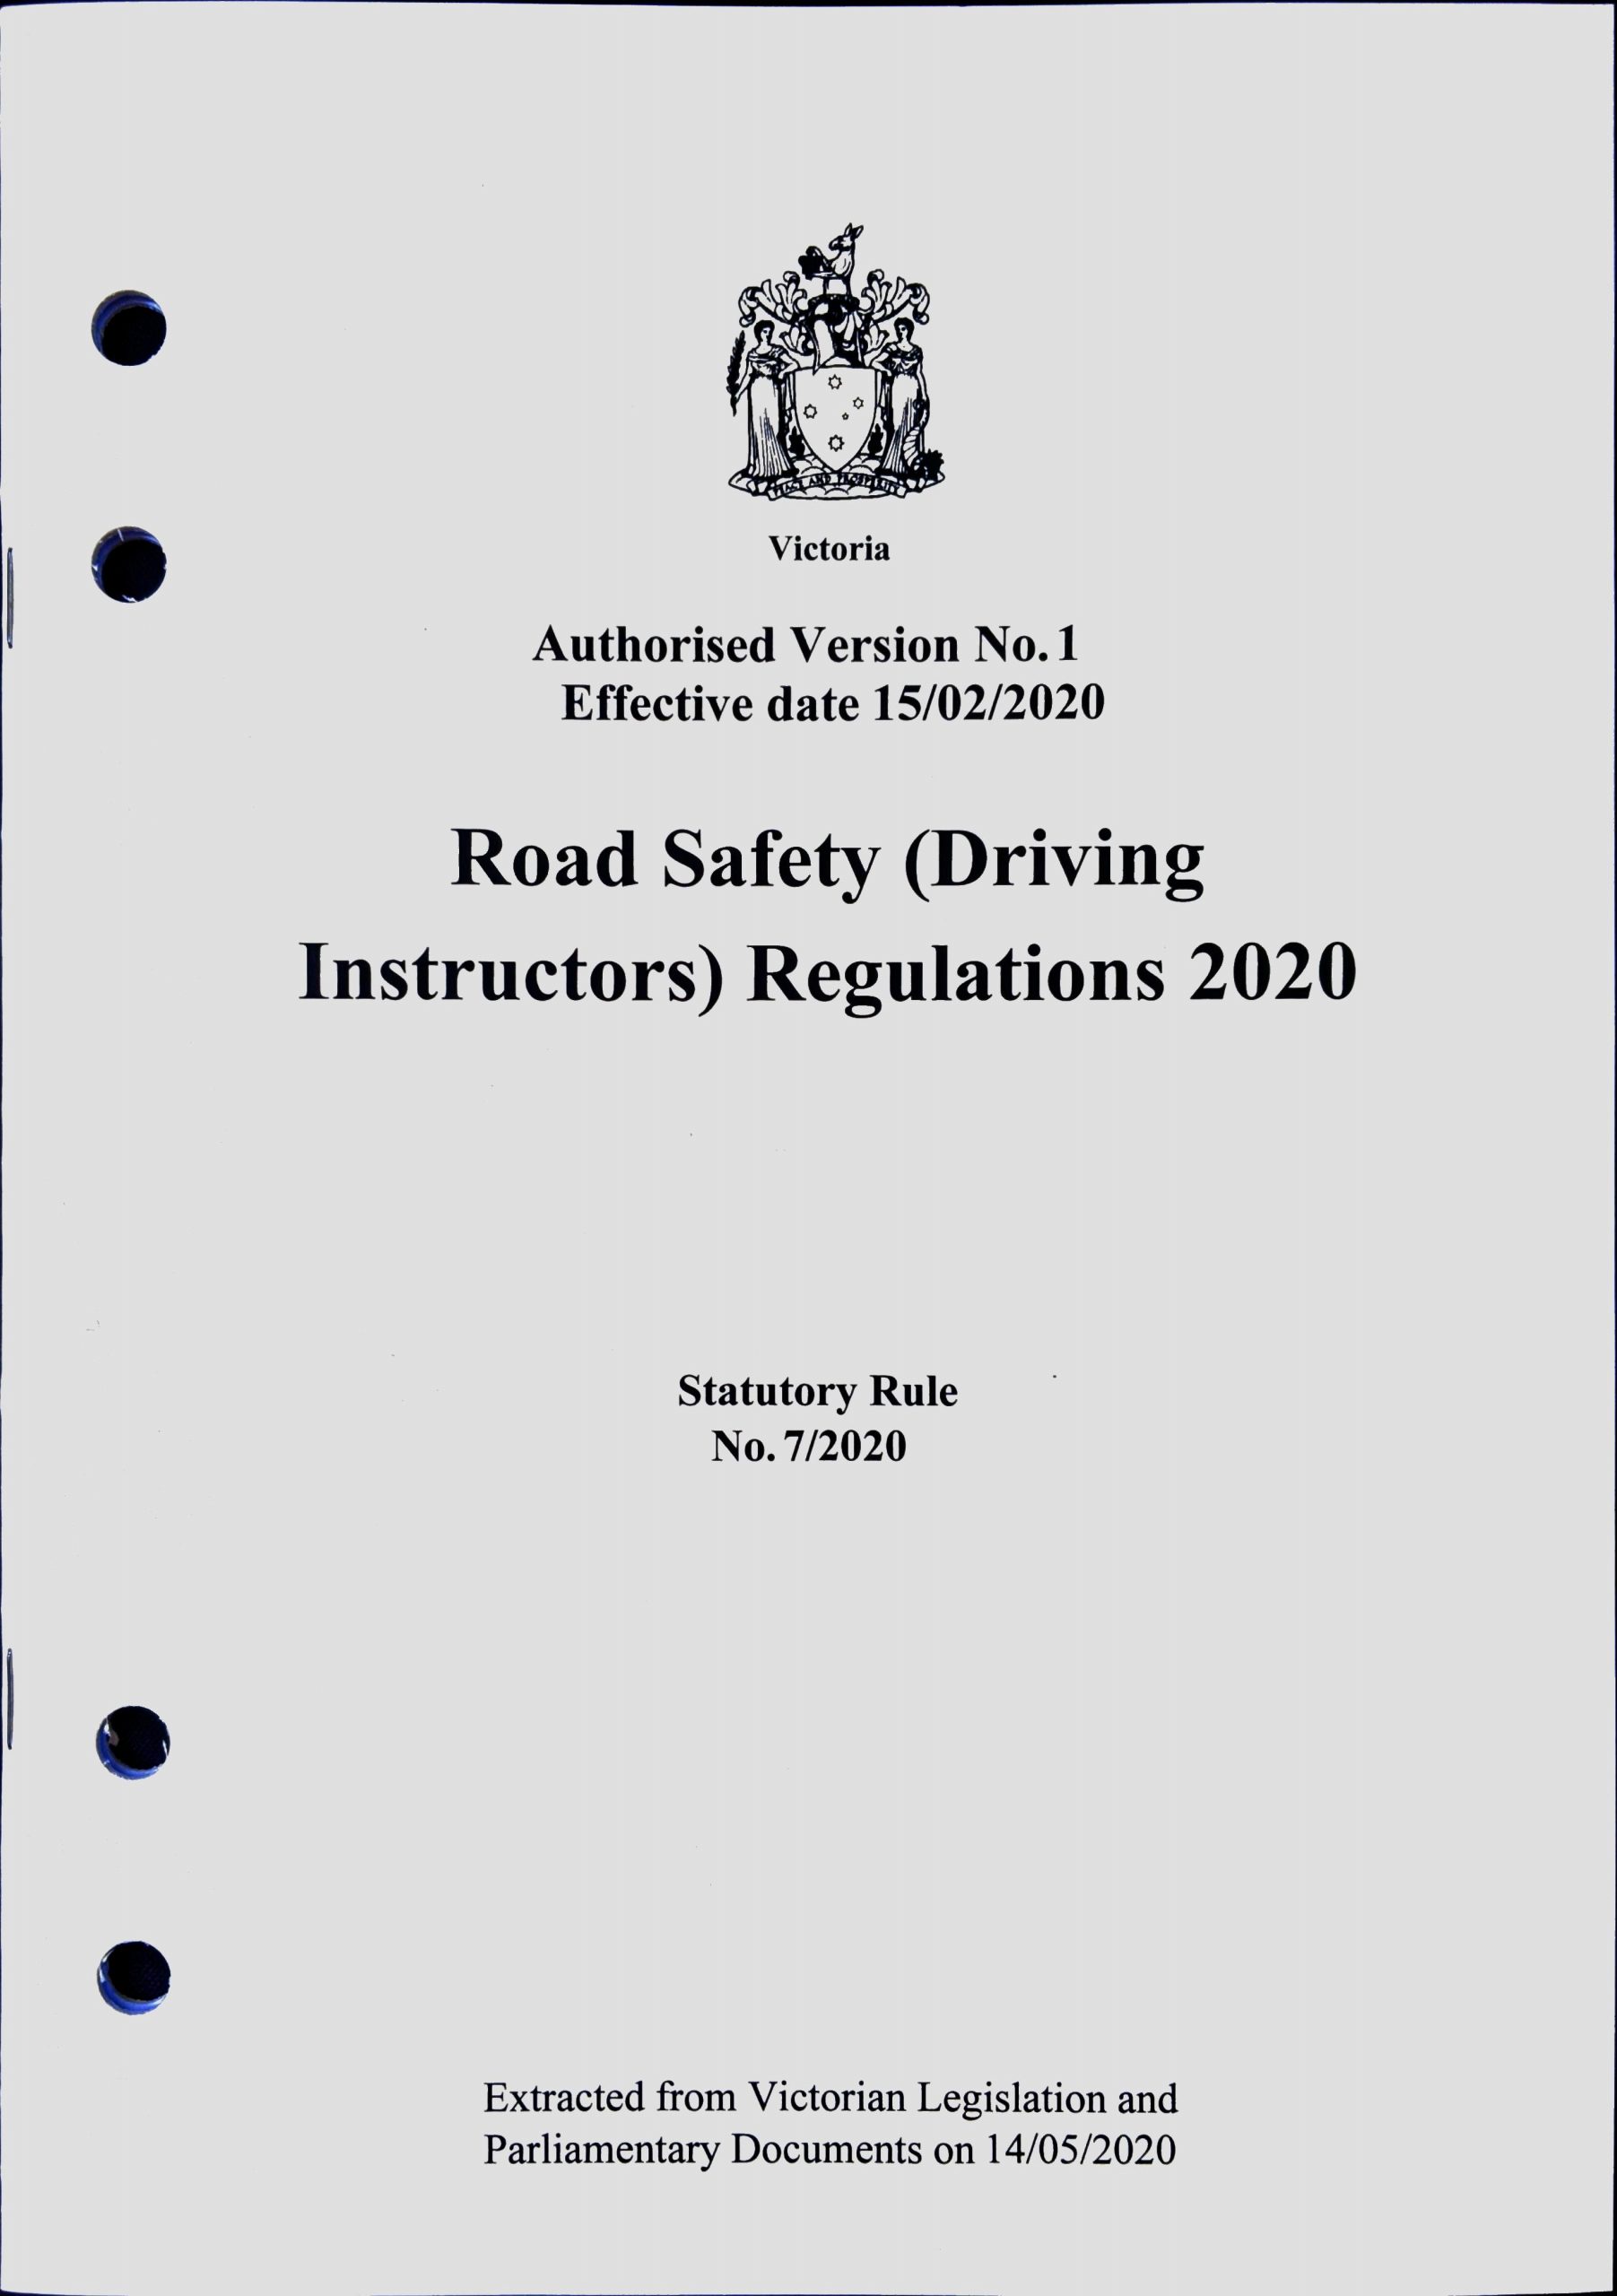 Road Safety (Driving Instructor) Regulations - Latest Version